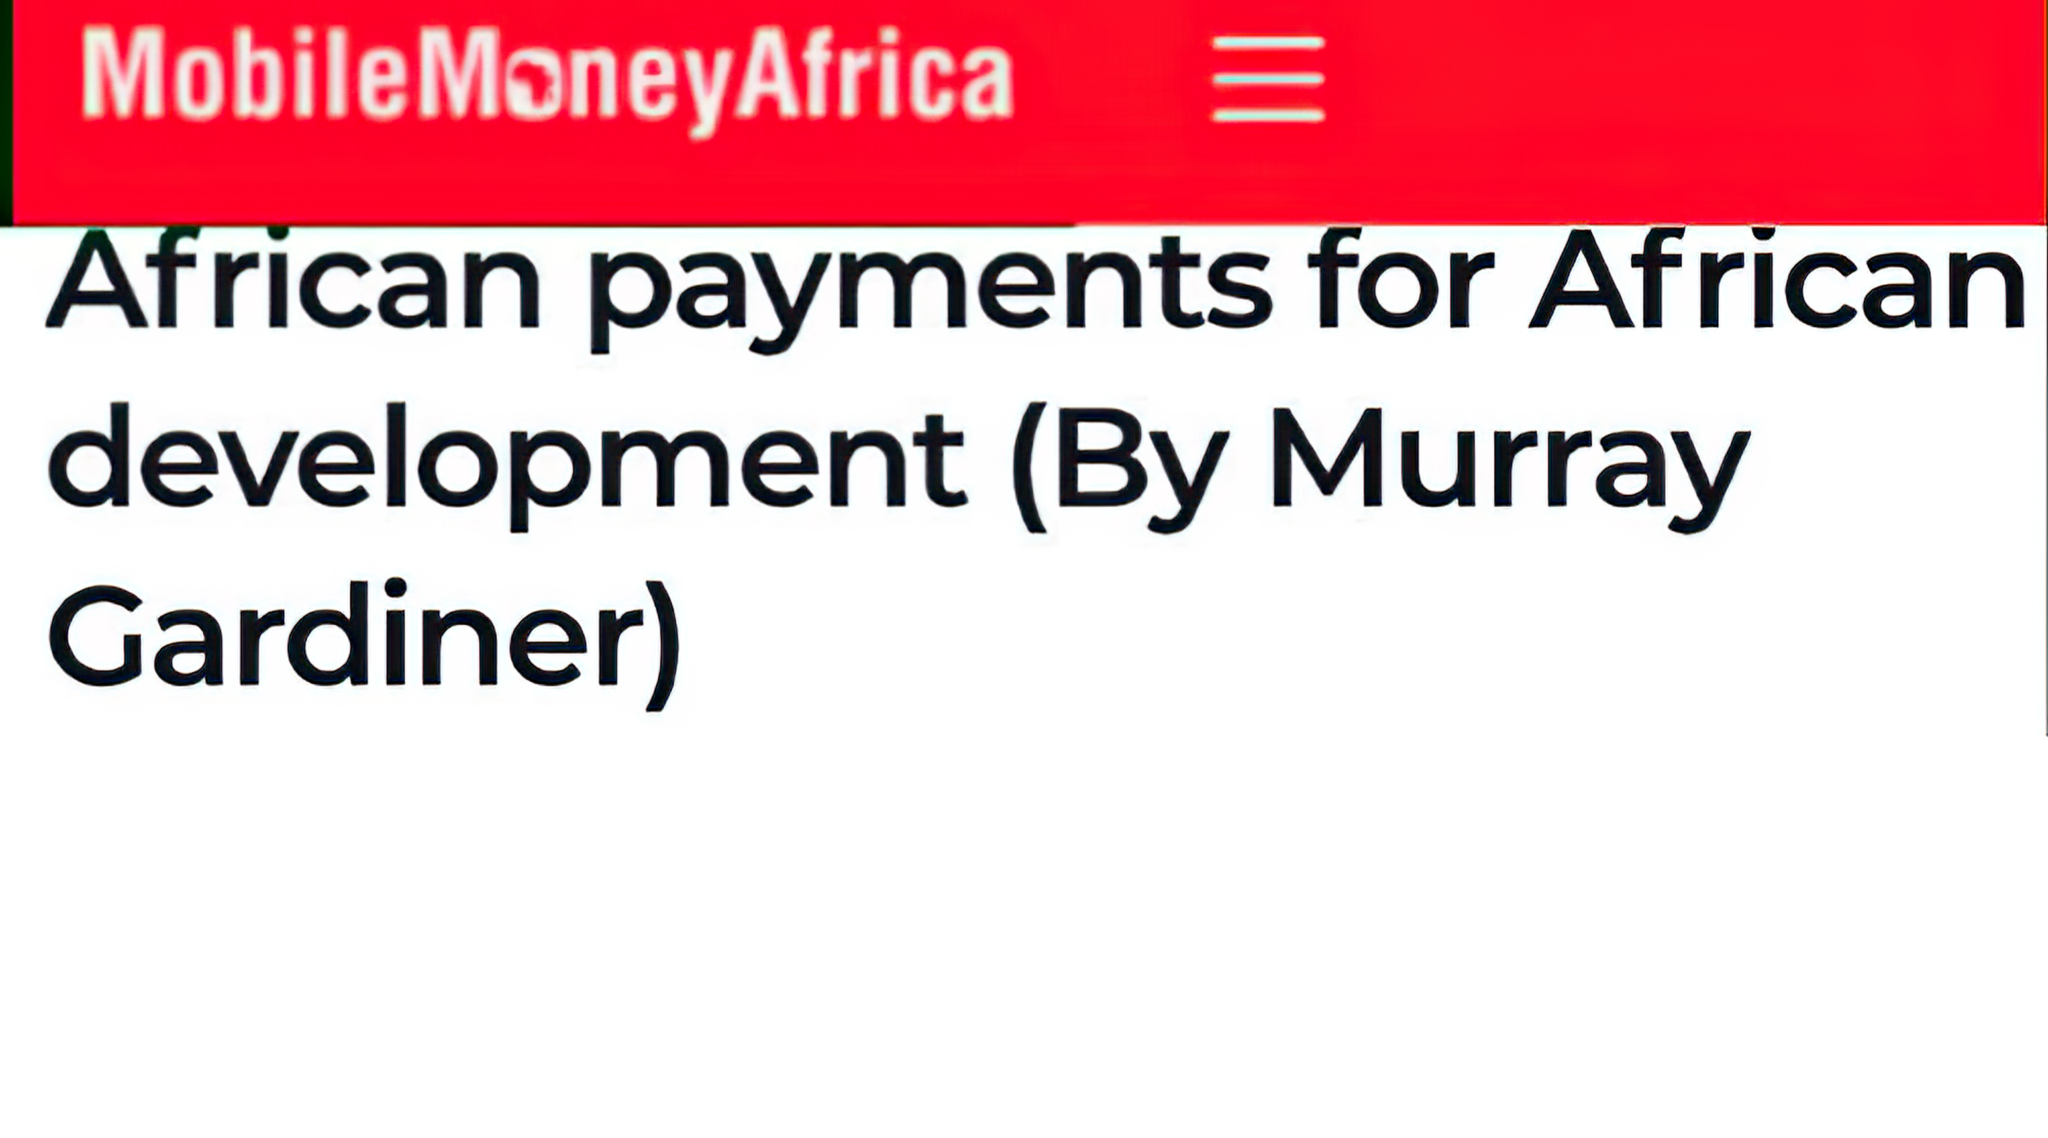 African payments for African development (By Murray Gardiner)